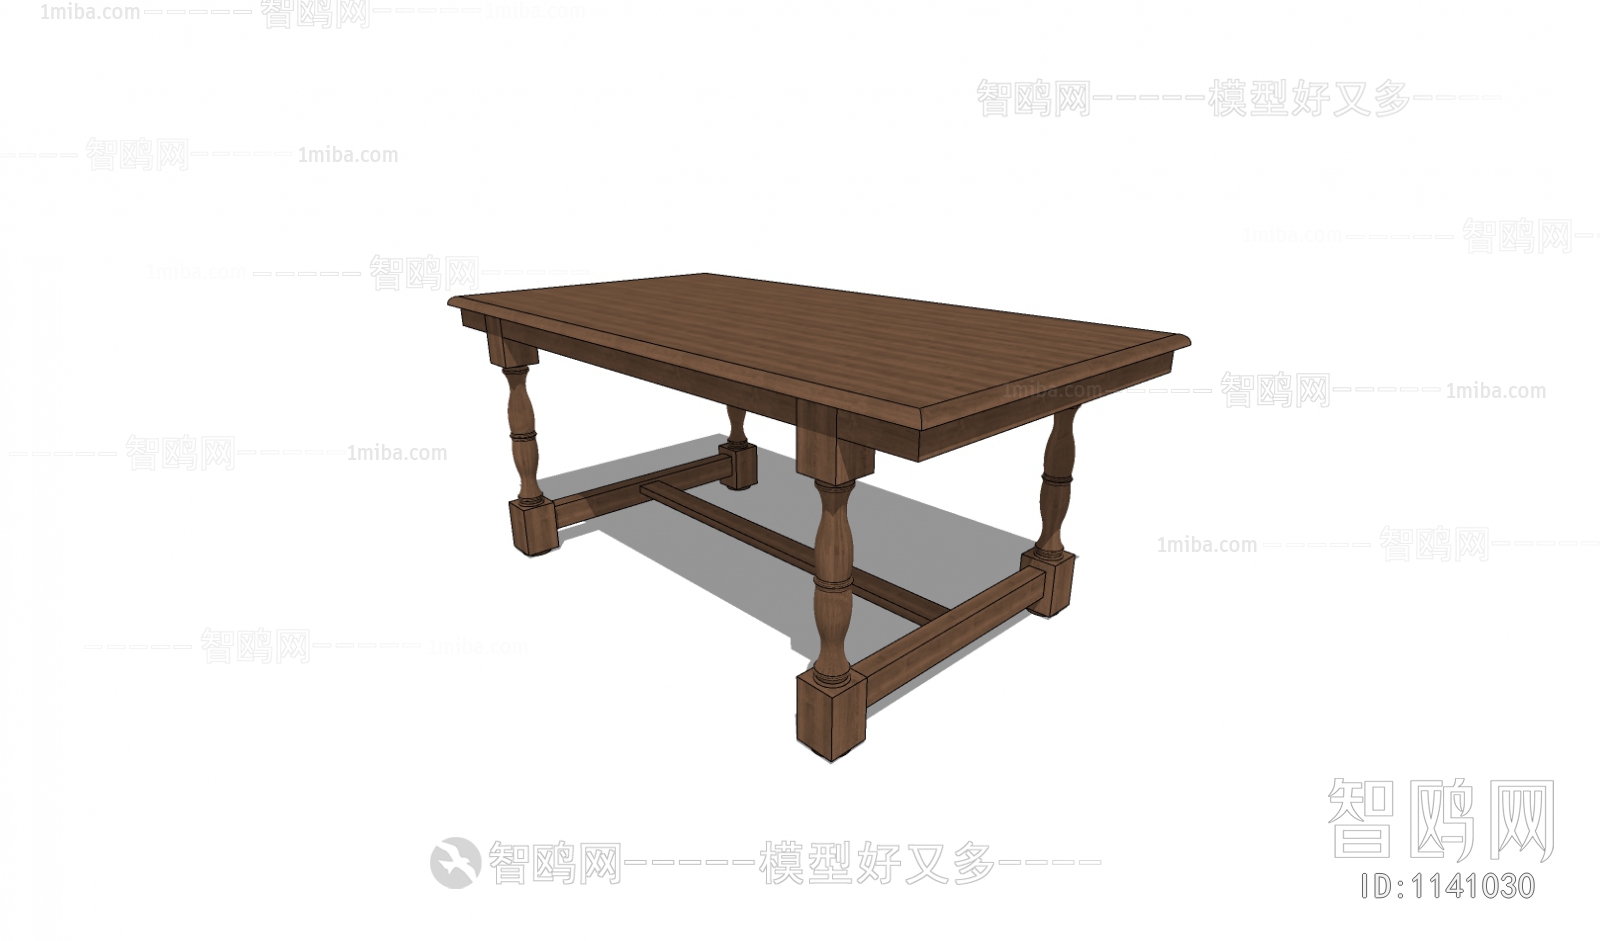 Chinese Style Desk